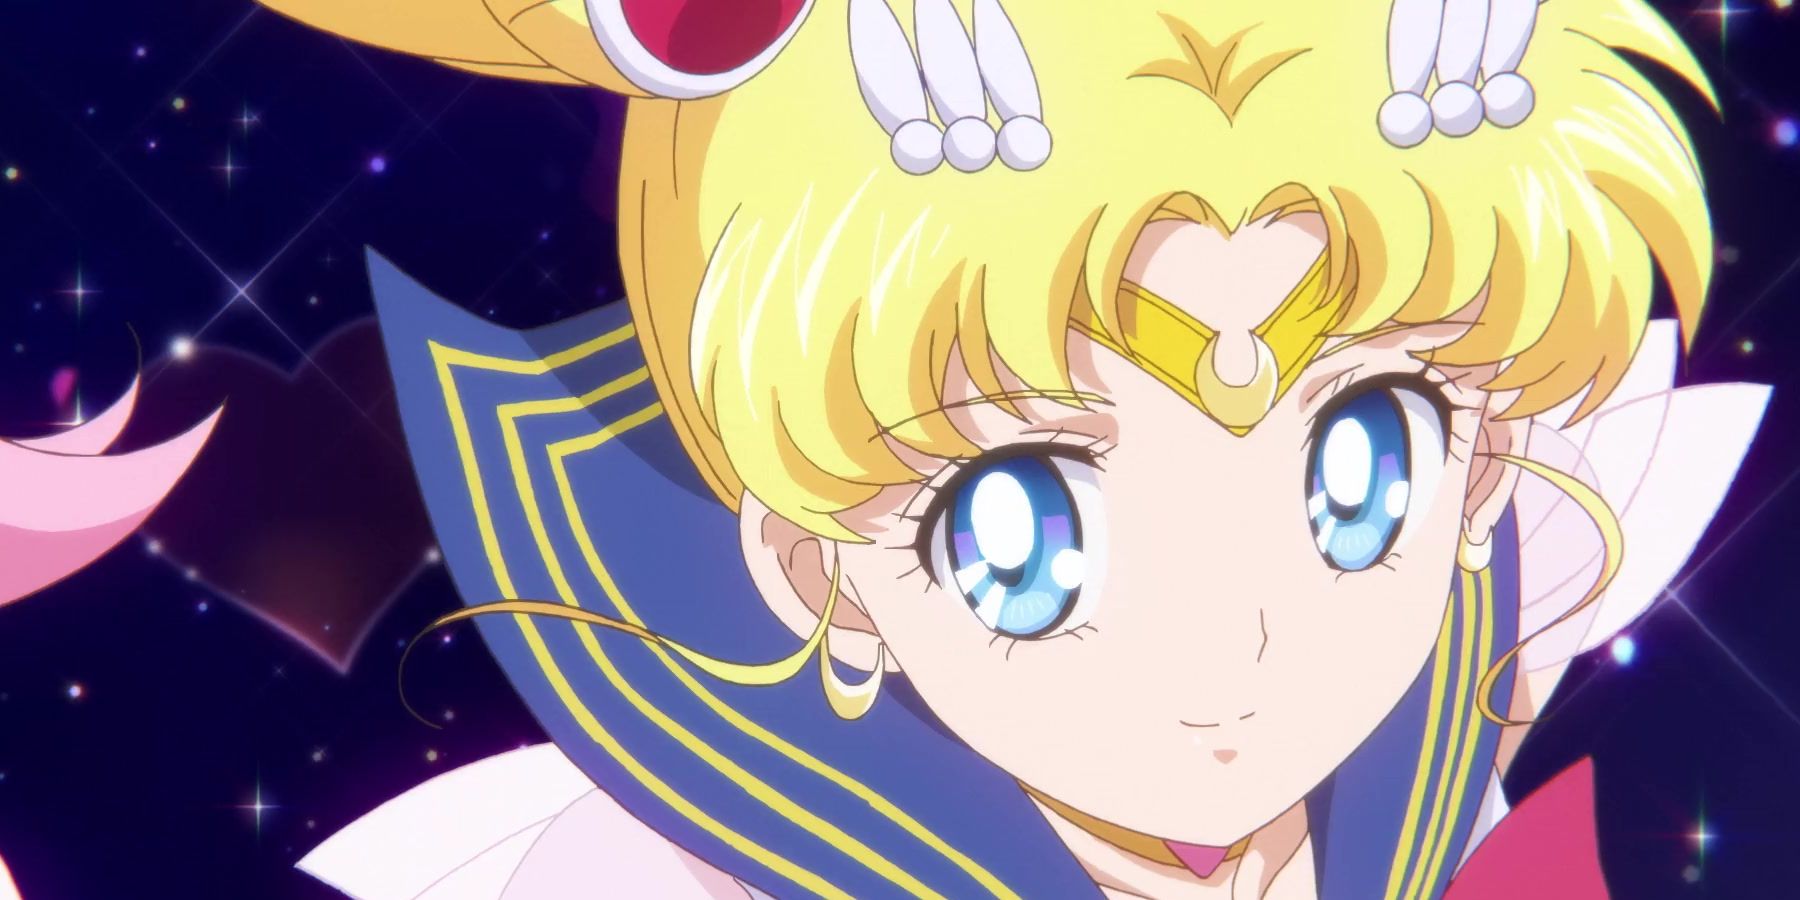 Look: Jimmy Choo Releases Sailor Moon Collaboration